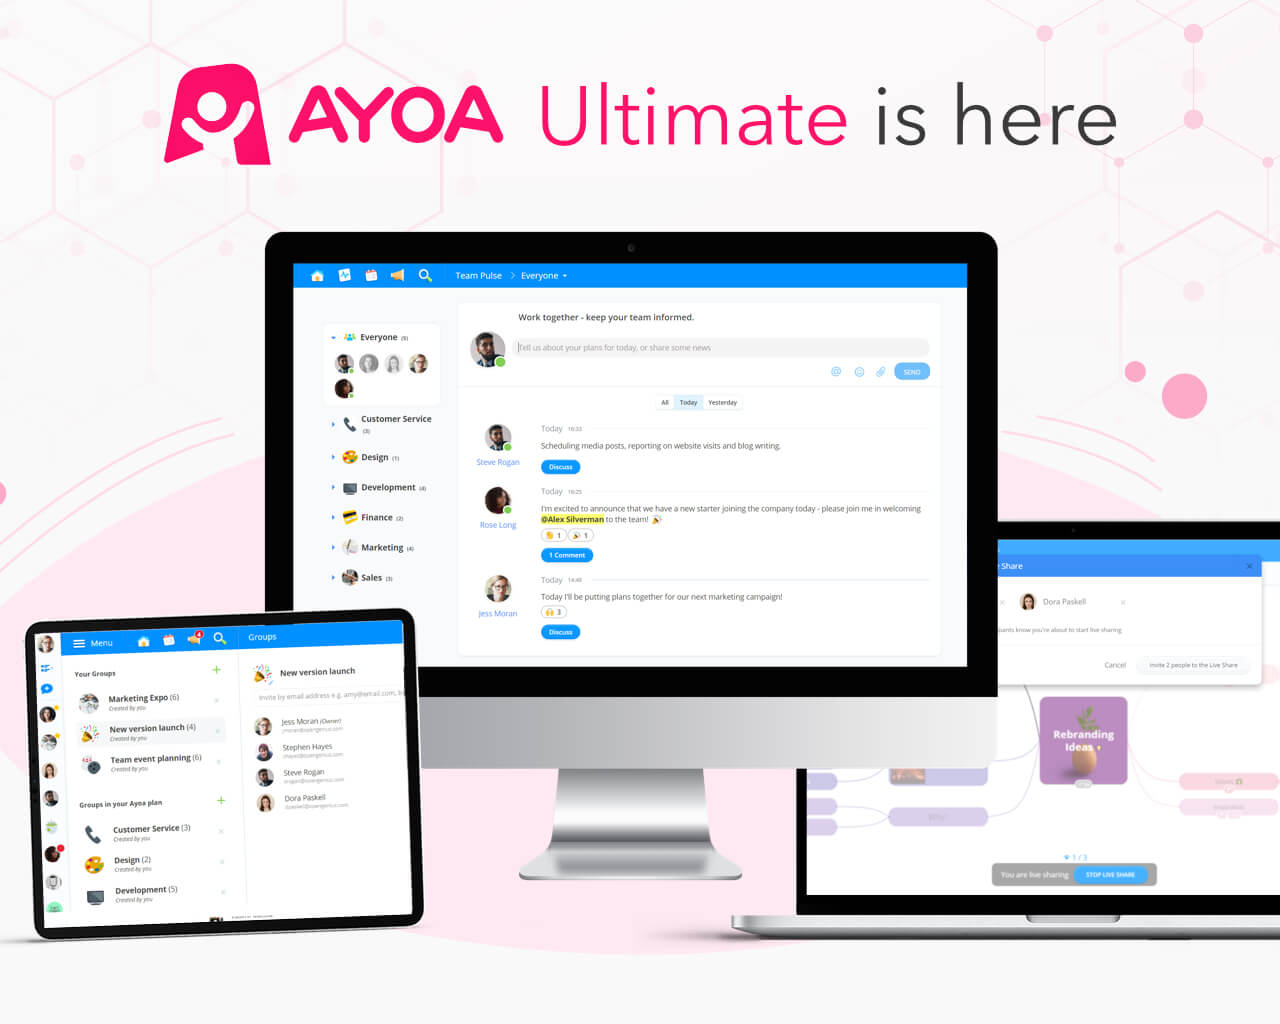 Ayoa | Get even more out of Ayoa with our new Ultimate Plan!